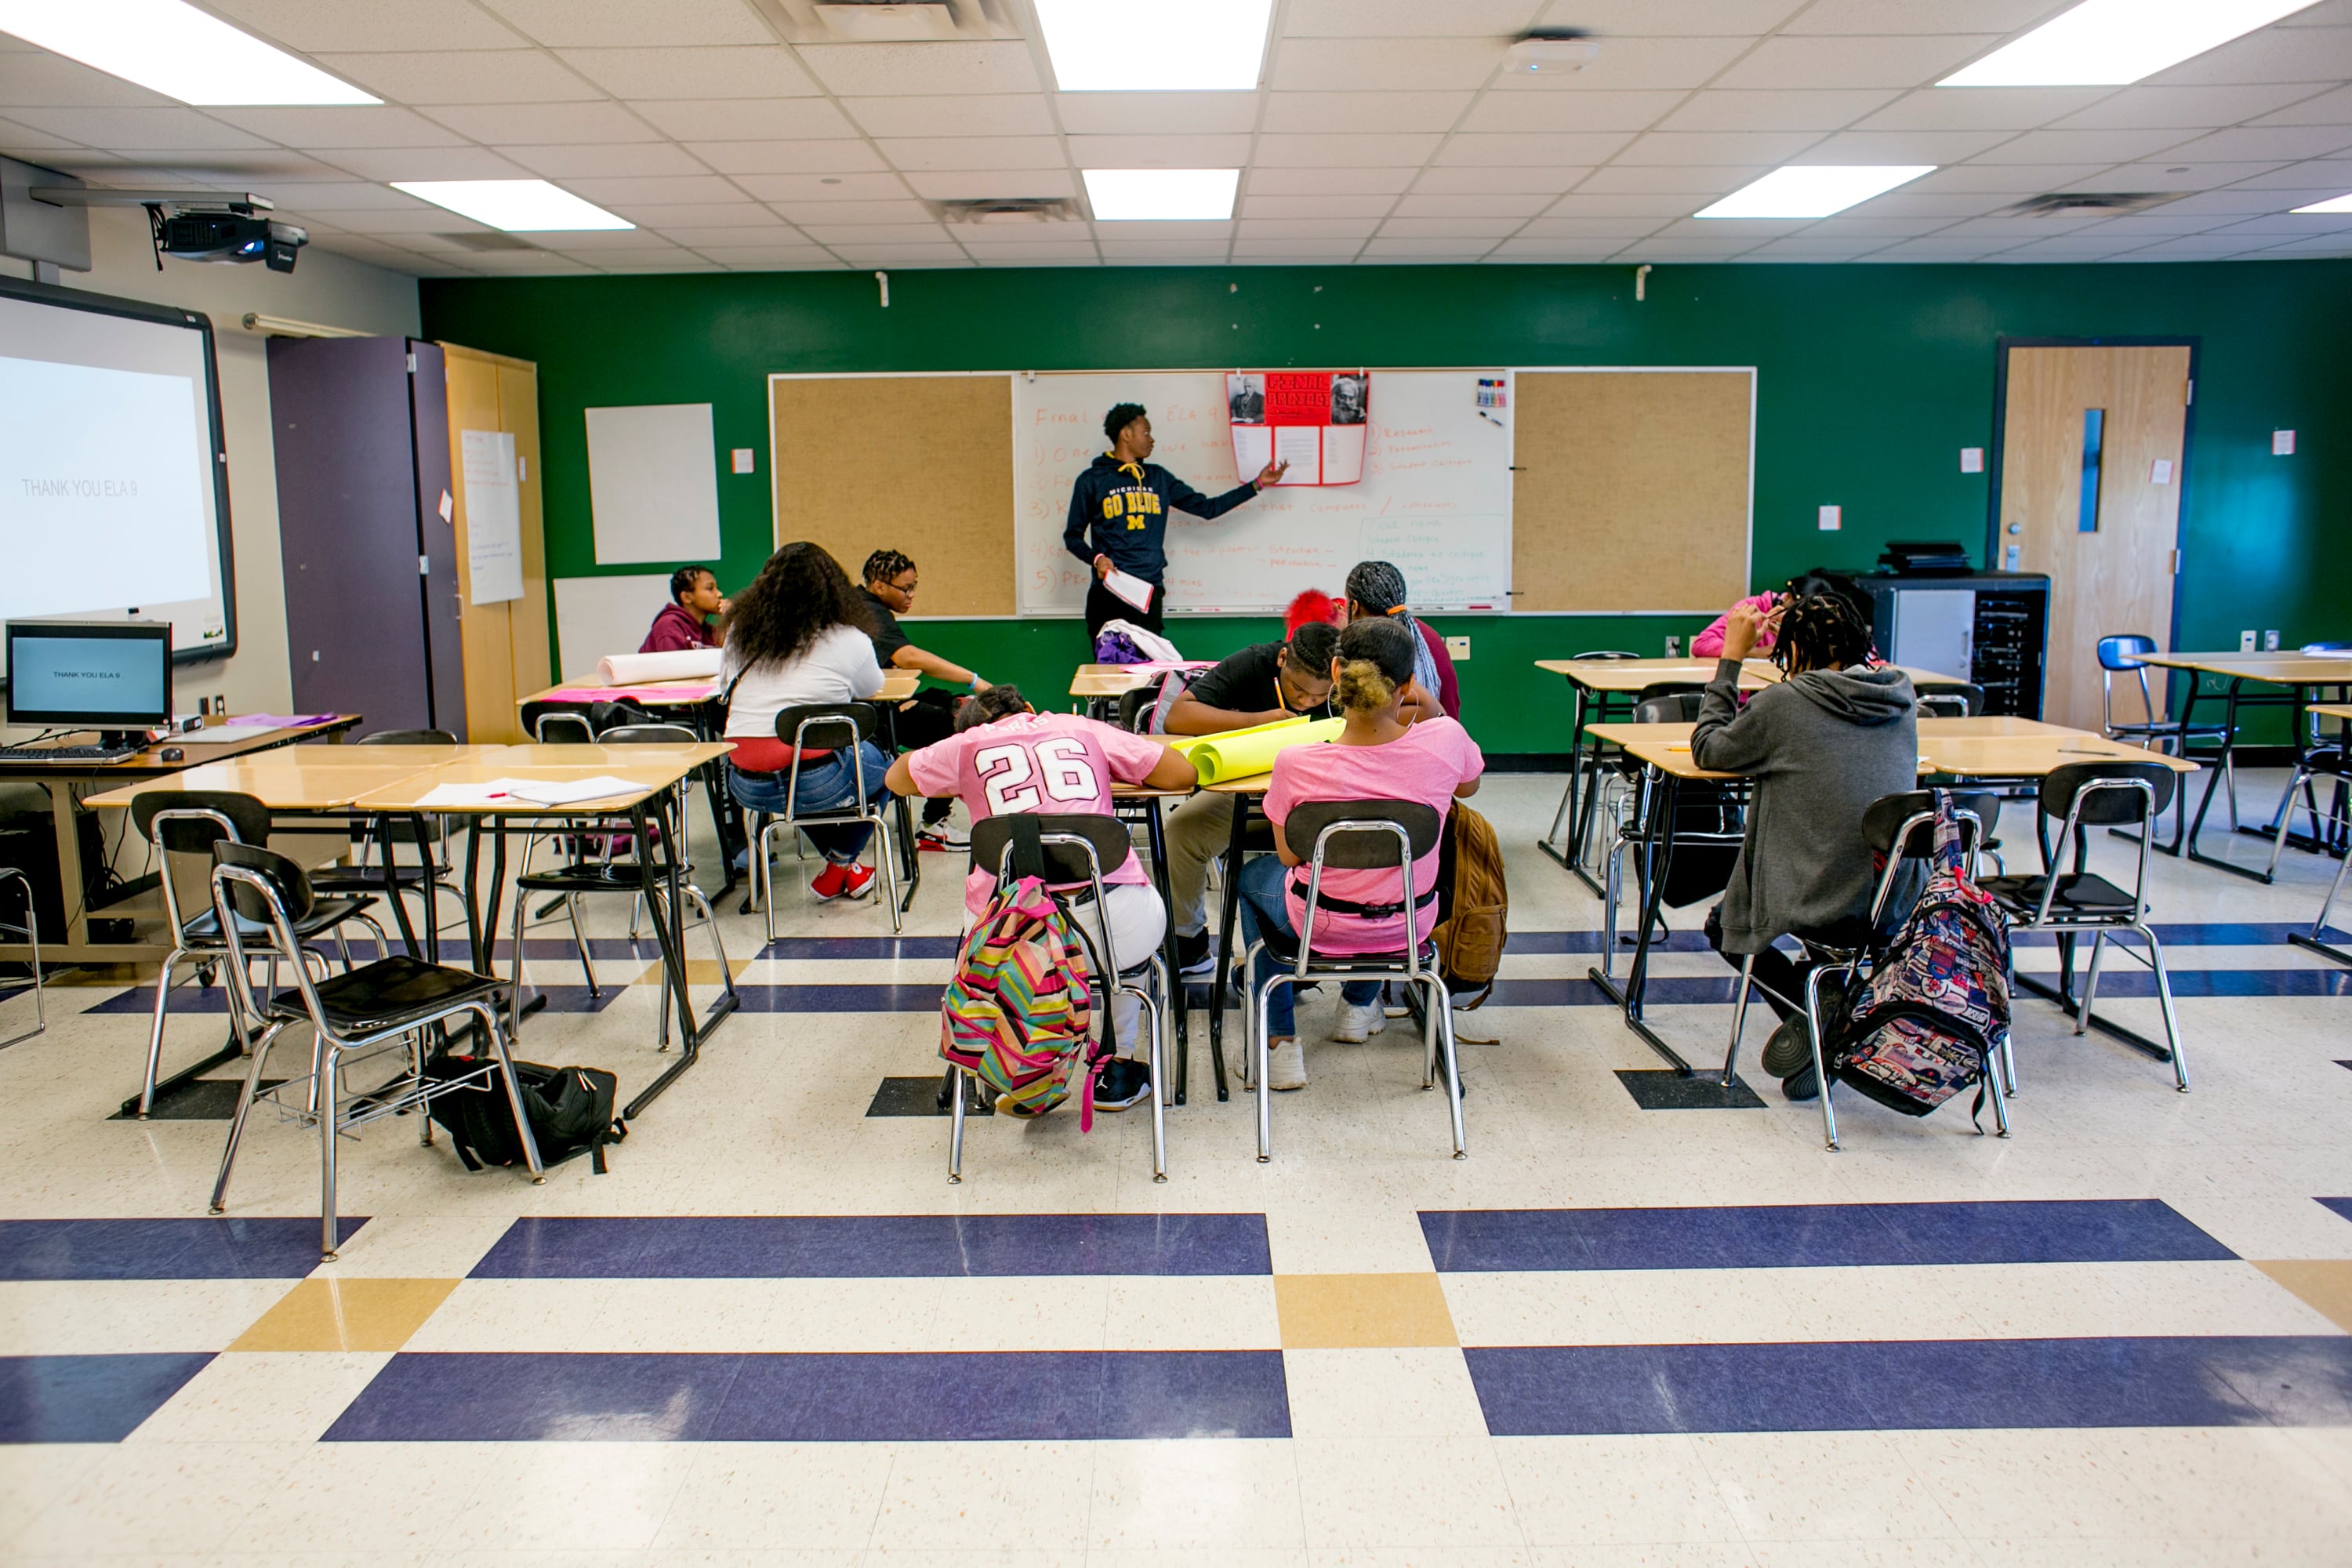 A student stands up in front of a small class of students sitting at wooden desks.